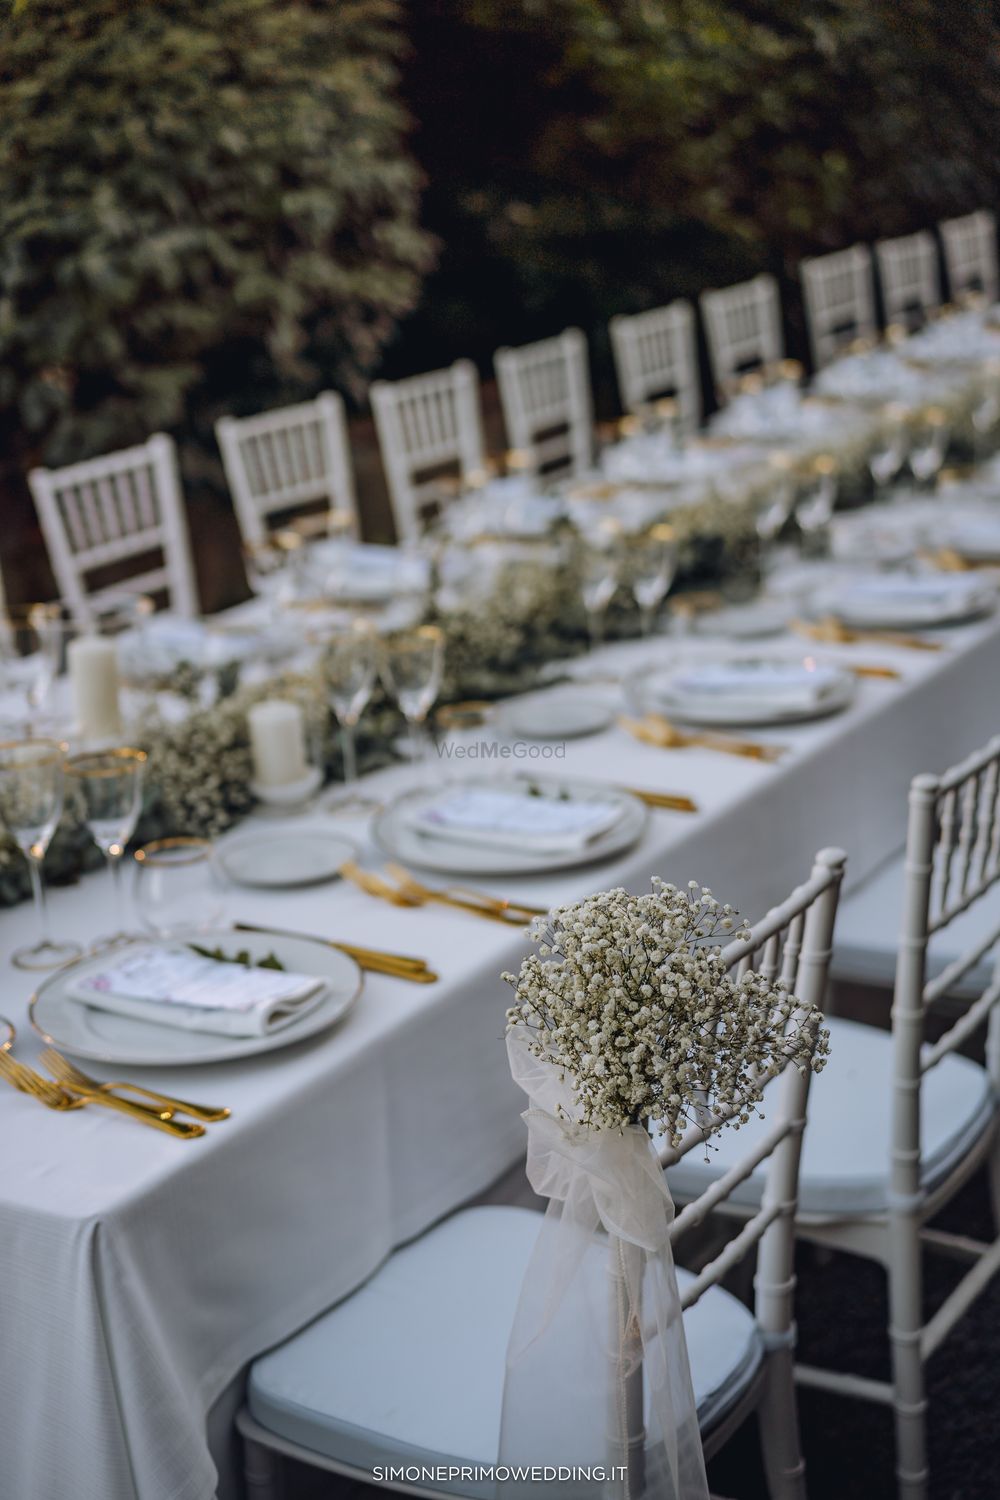 Photo From Wedding in Tuscany - By C&G Wedding and Event Designer